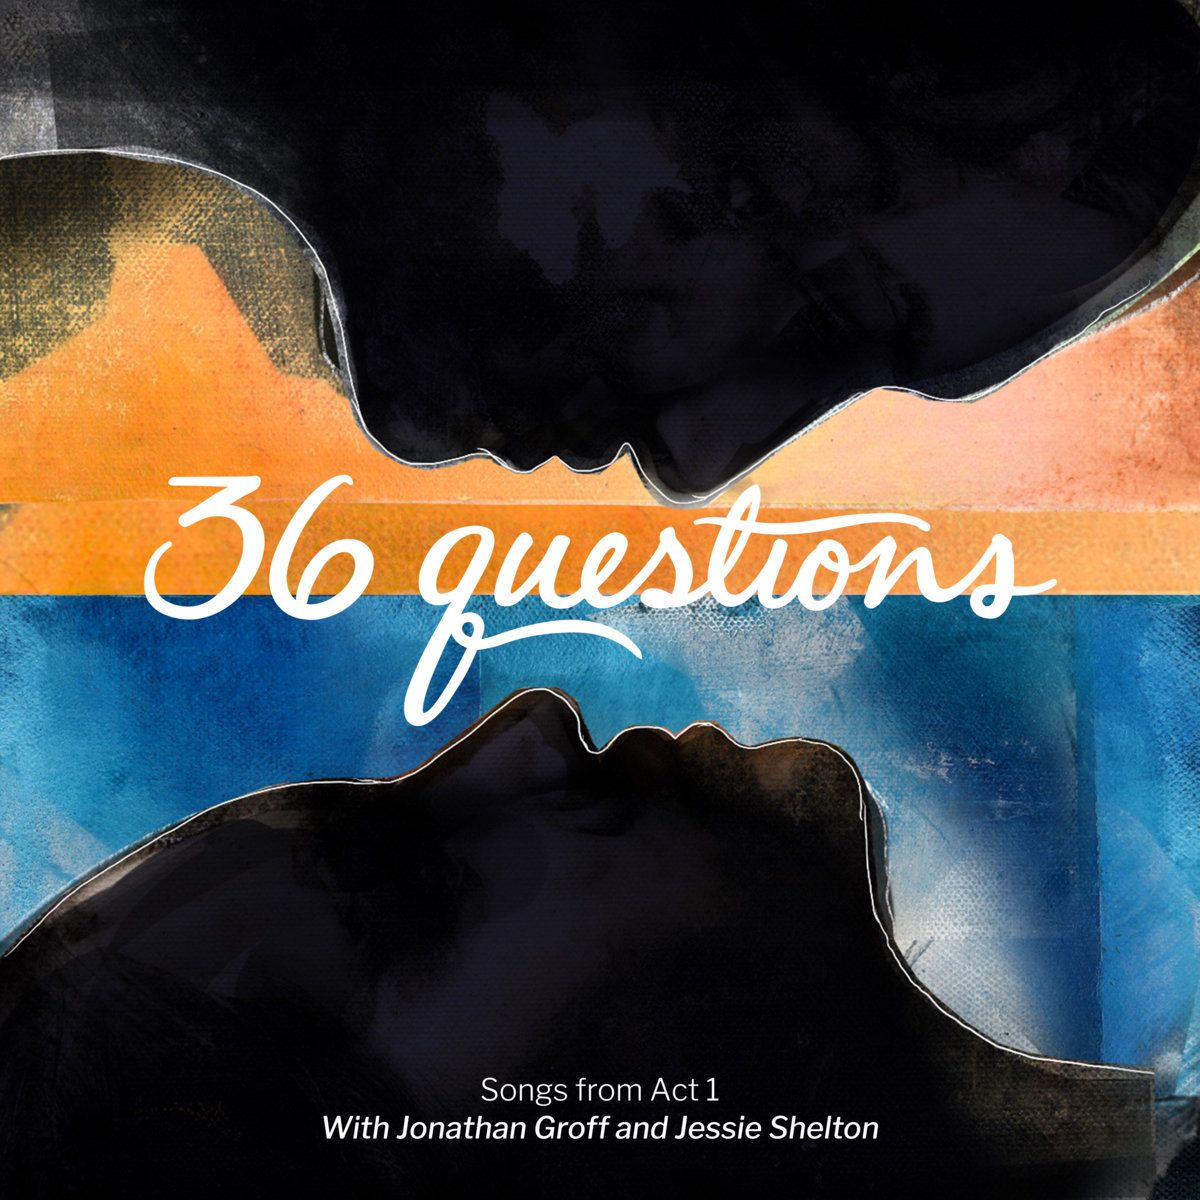 A Review on "36 Questions: A Podcast Musical"